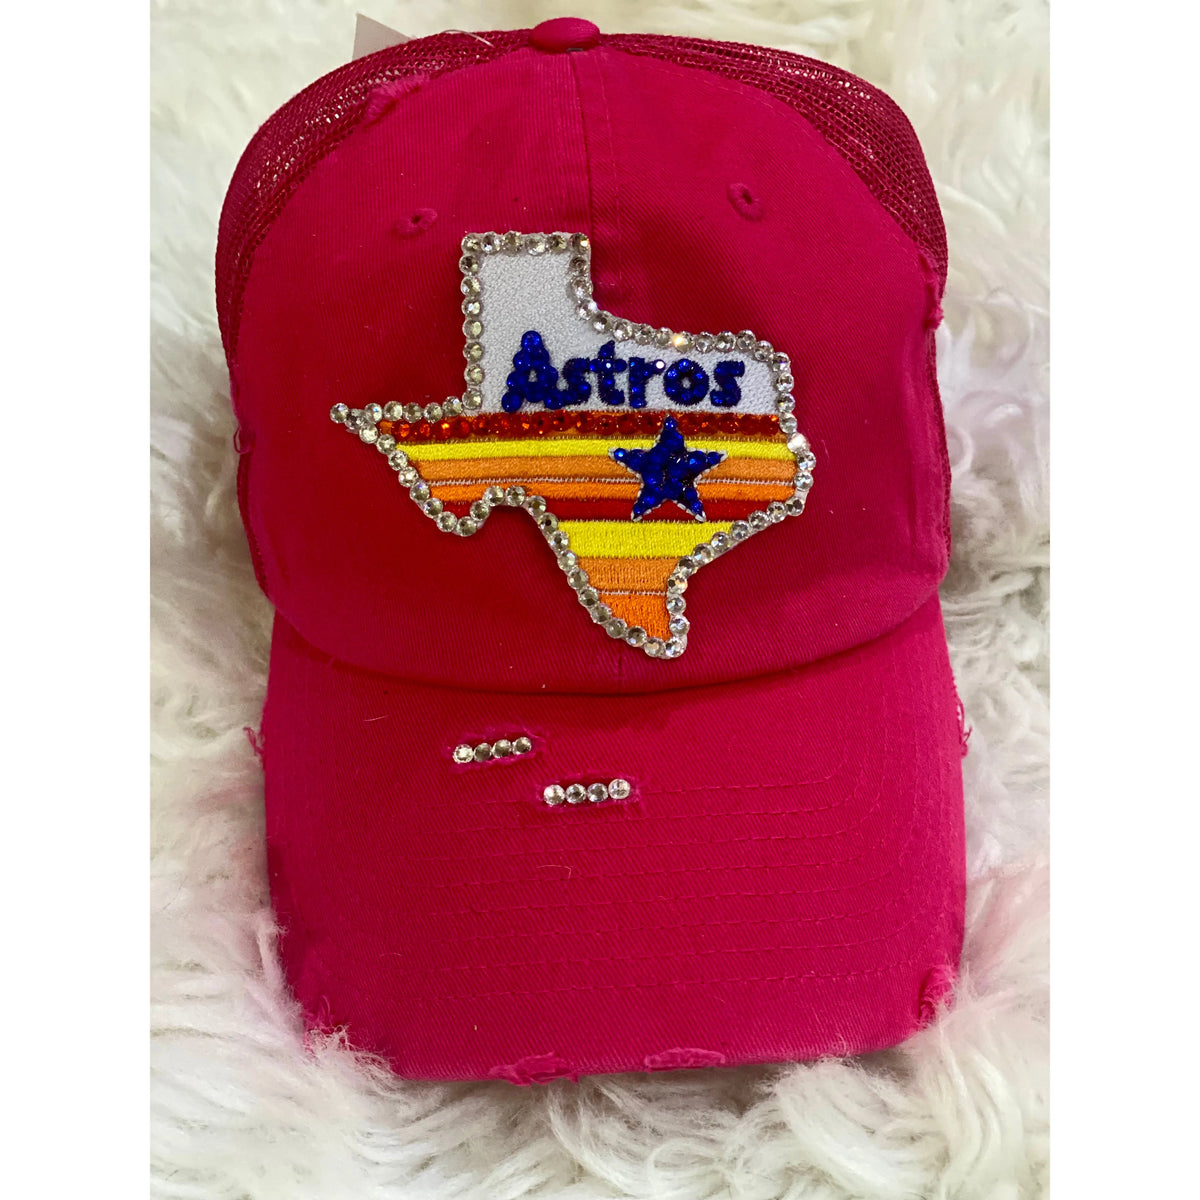 Hot Pink Distressed Truckers Cap with Rhinestone Texas Astros Patch